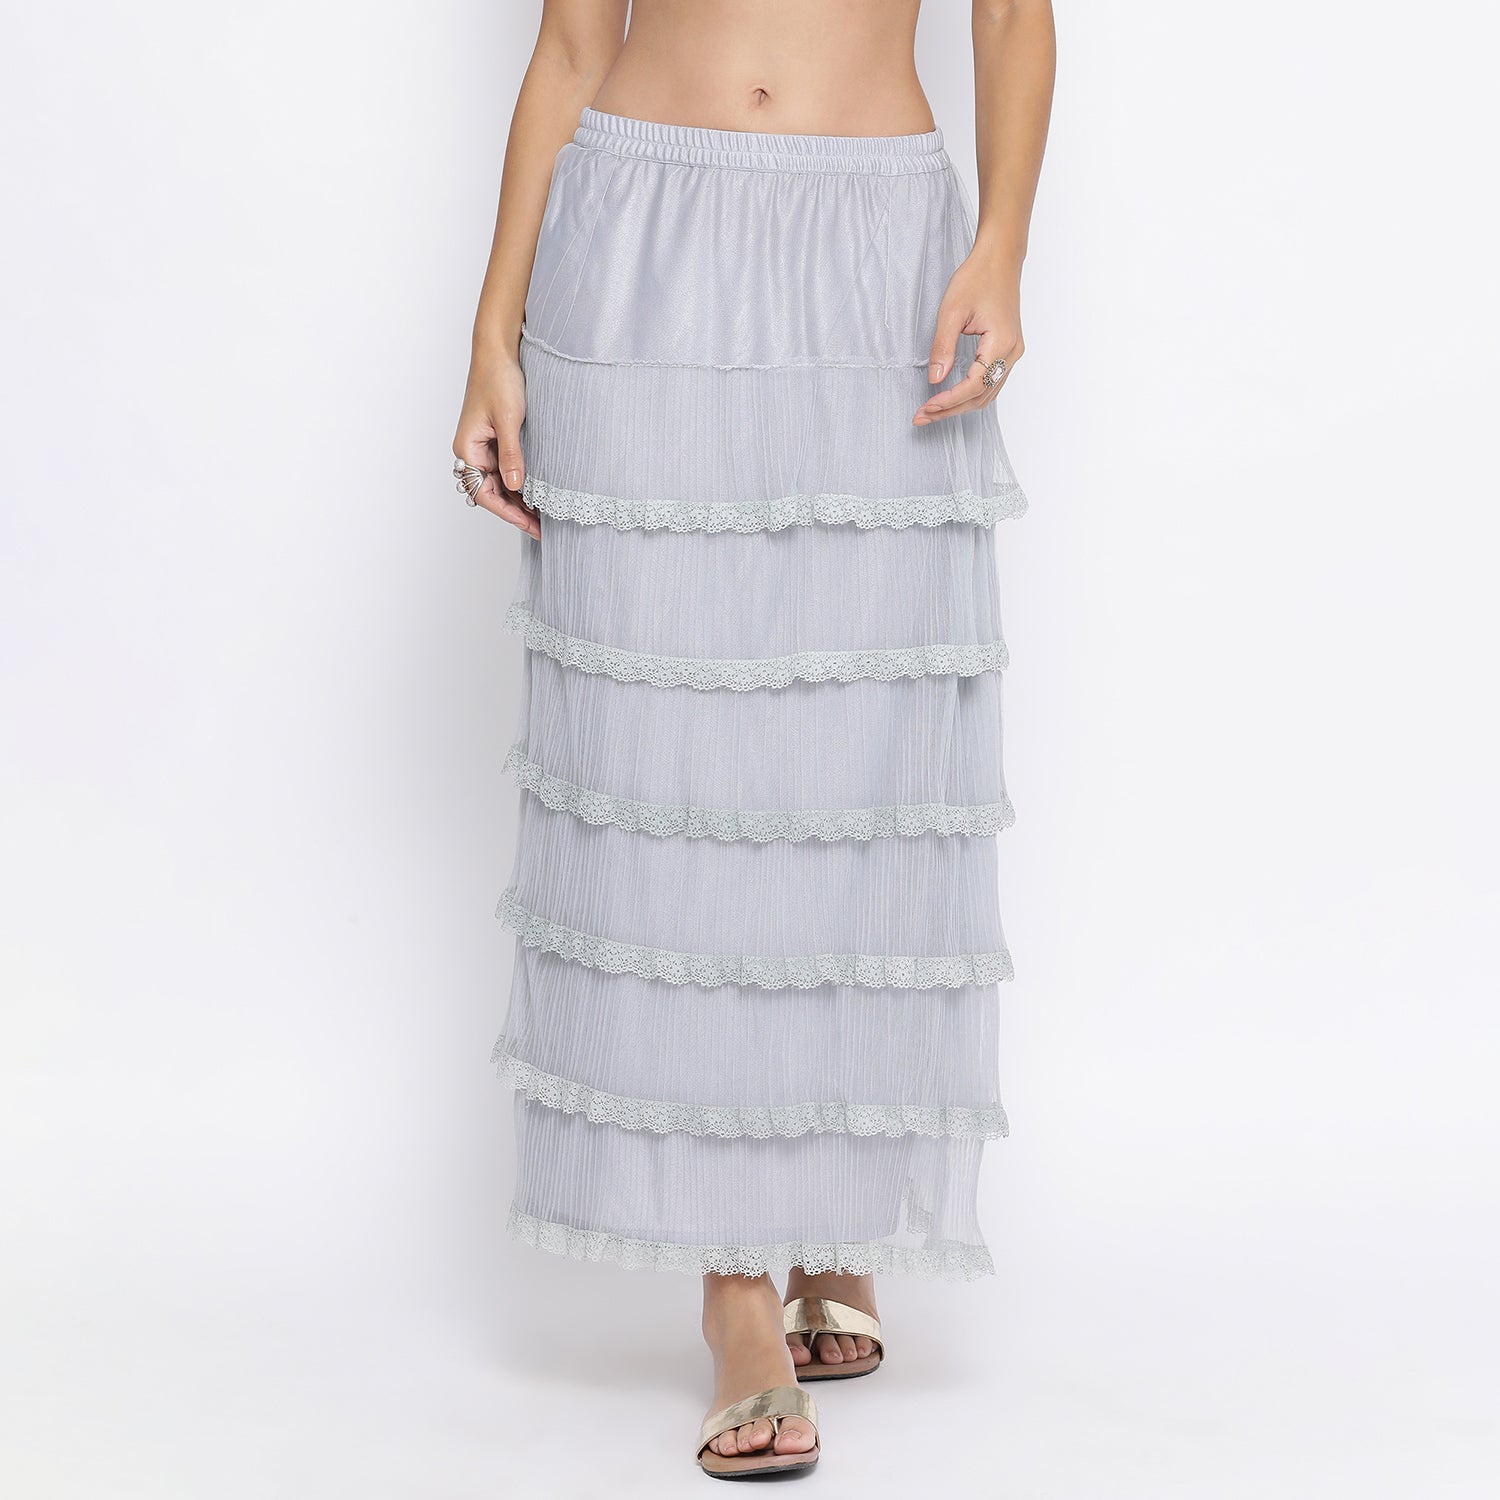 Light Blue Net Frill Skirt With Lace